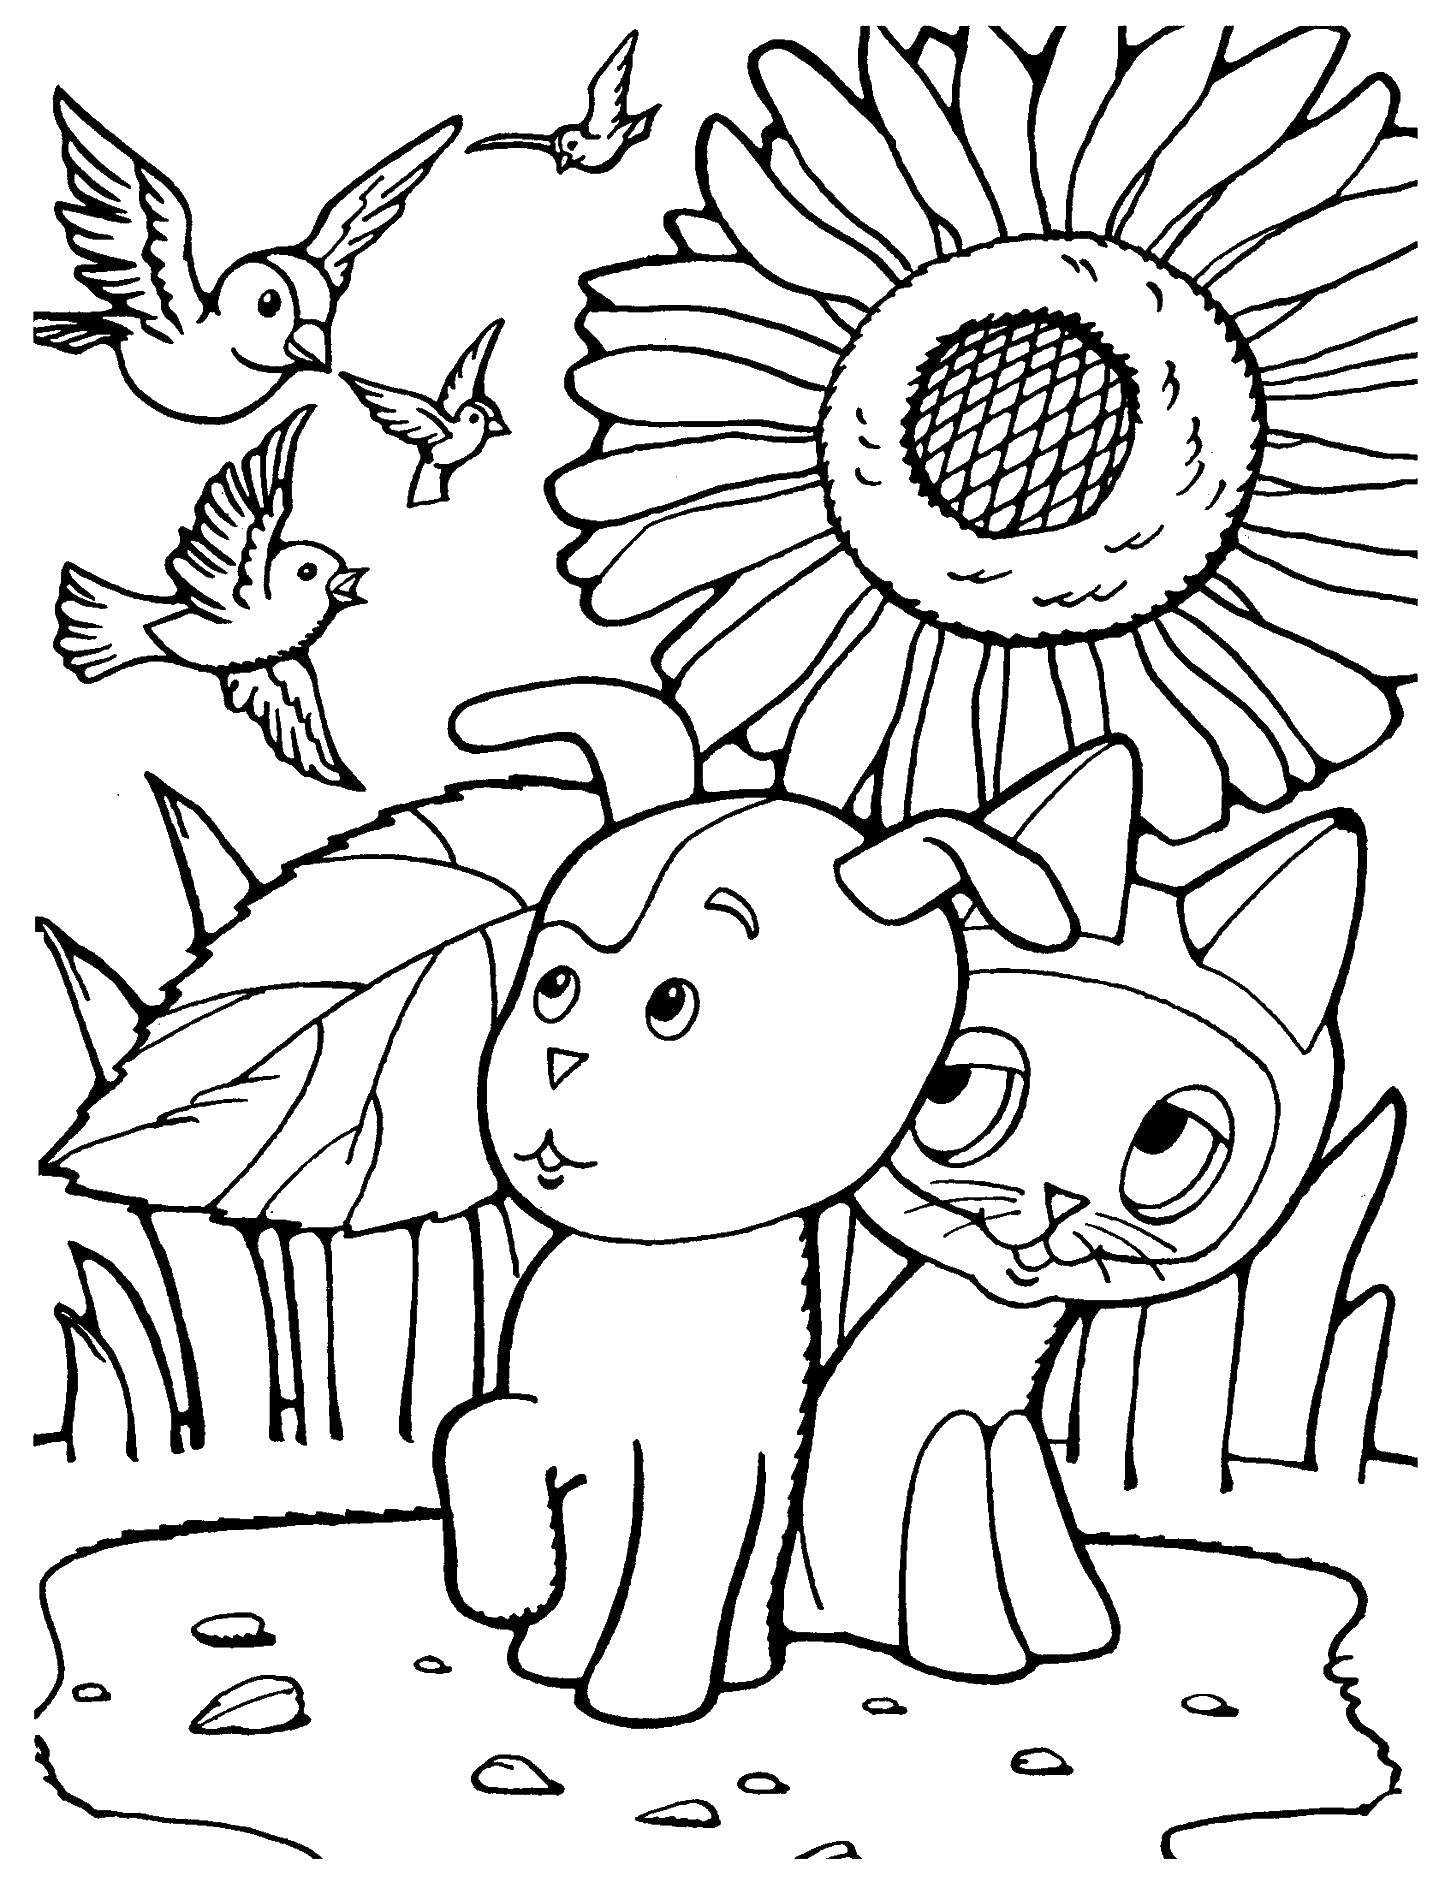 Coloring The cat plays with the dog. Category Soviet coloring. Tags:  the dog.